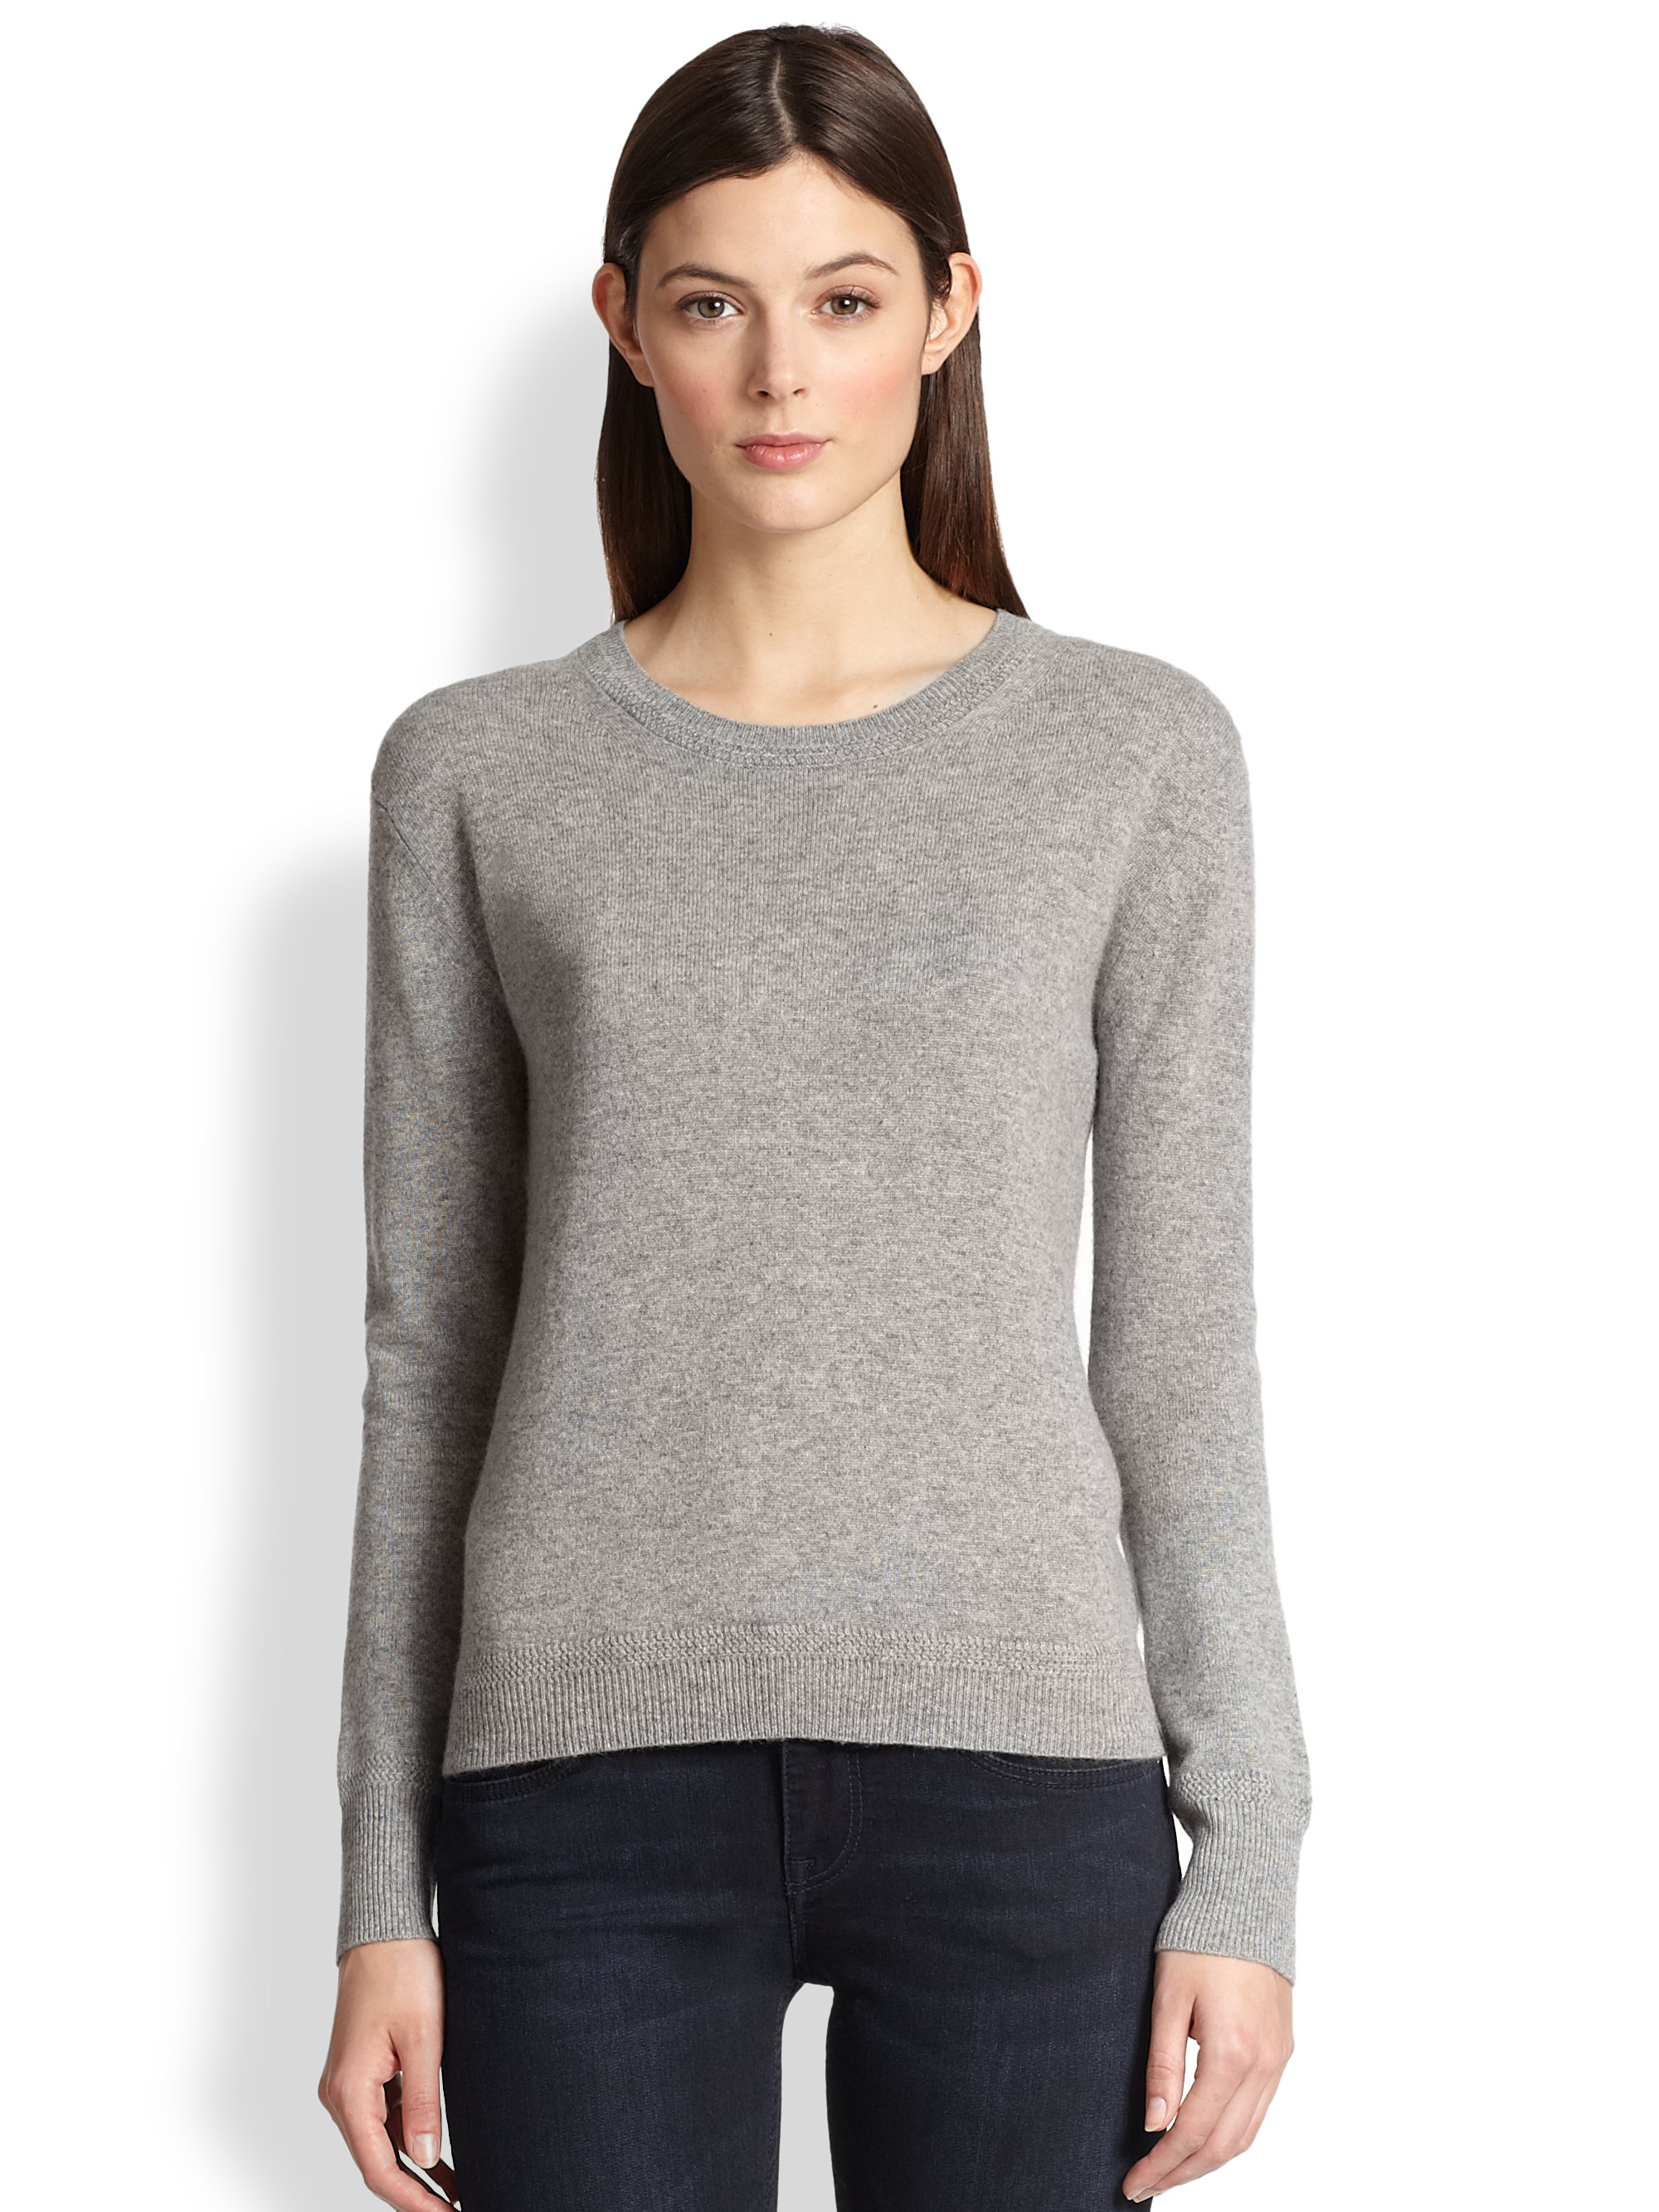 Burberry Brit Elbow Patch Sweater In Gray Light Grey Lyst